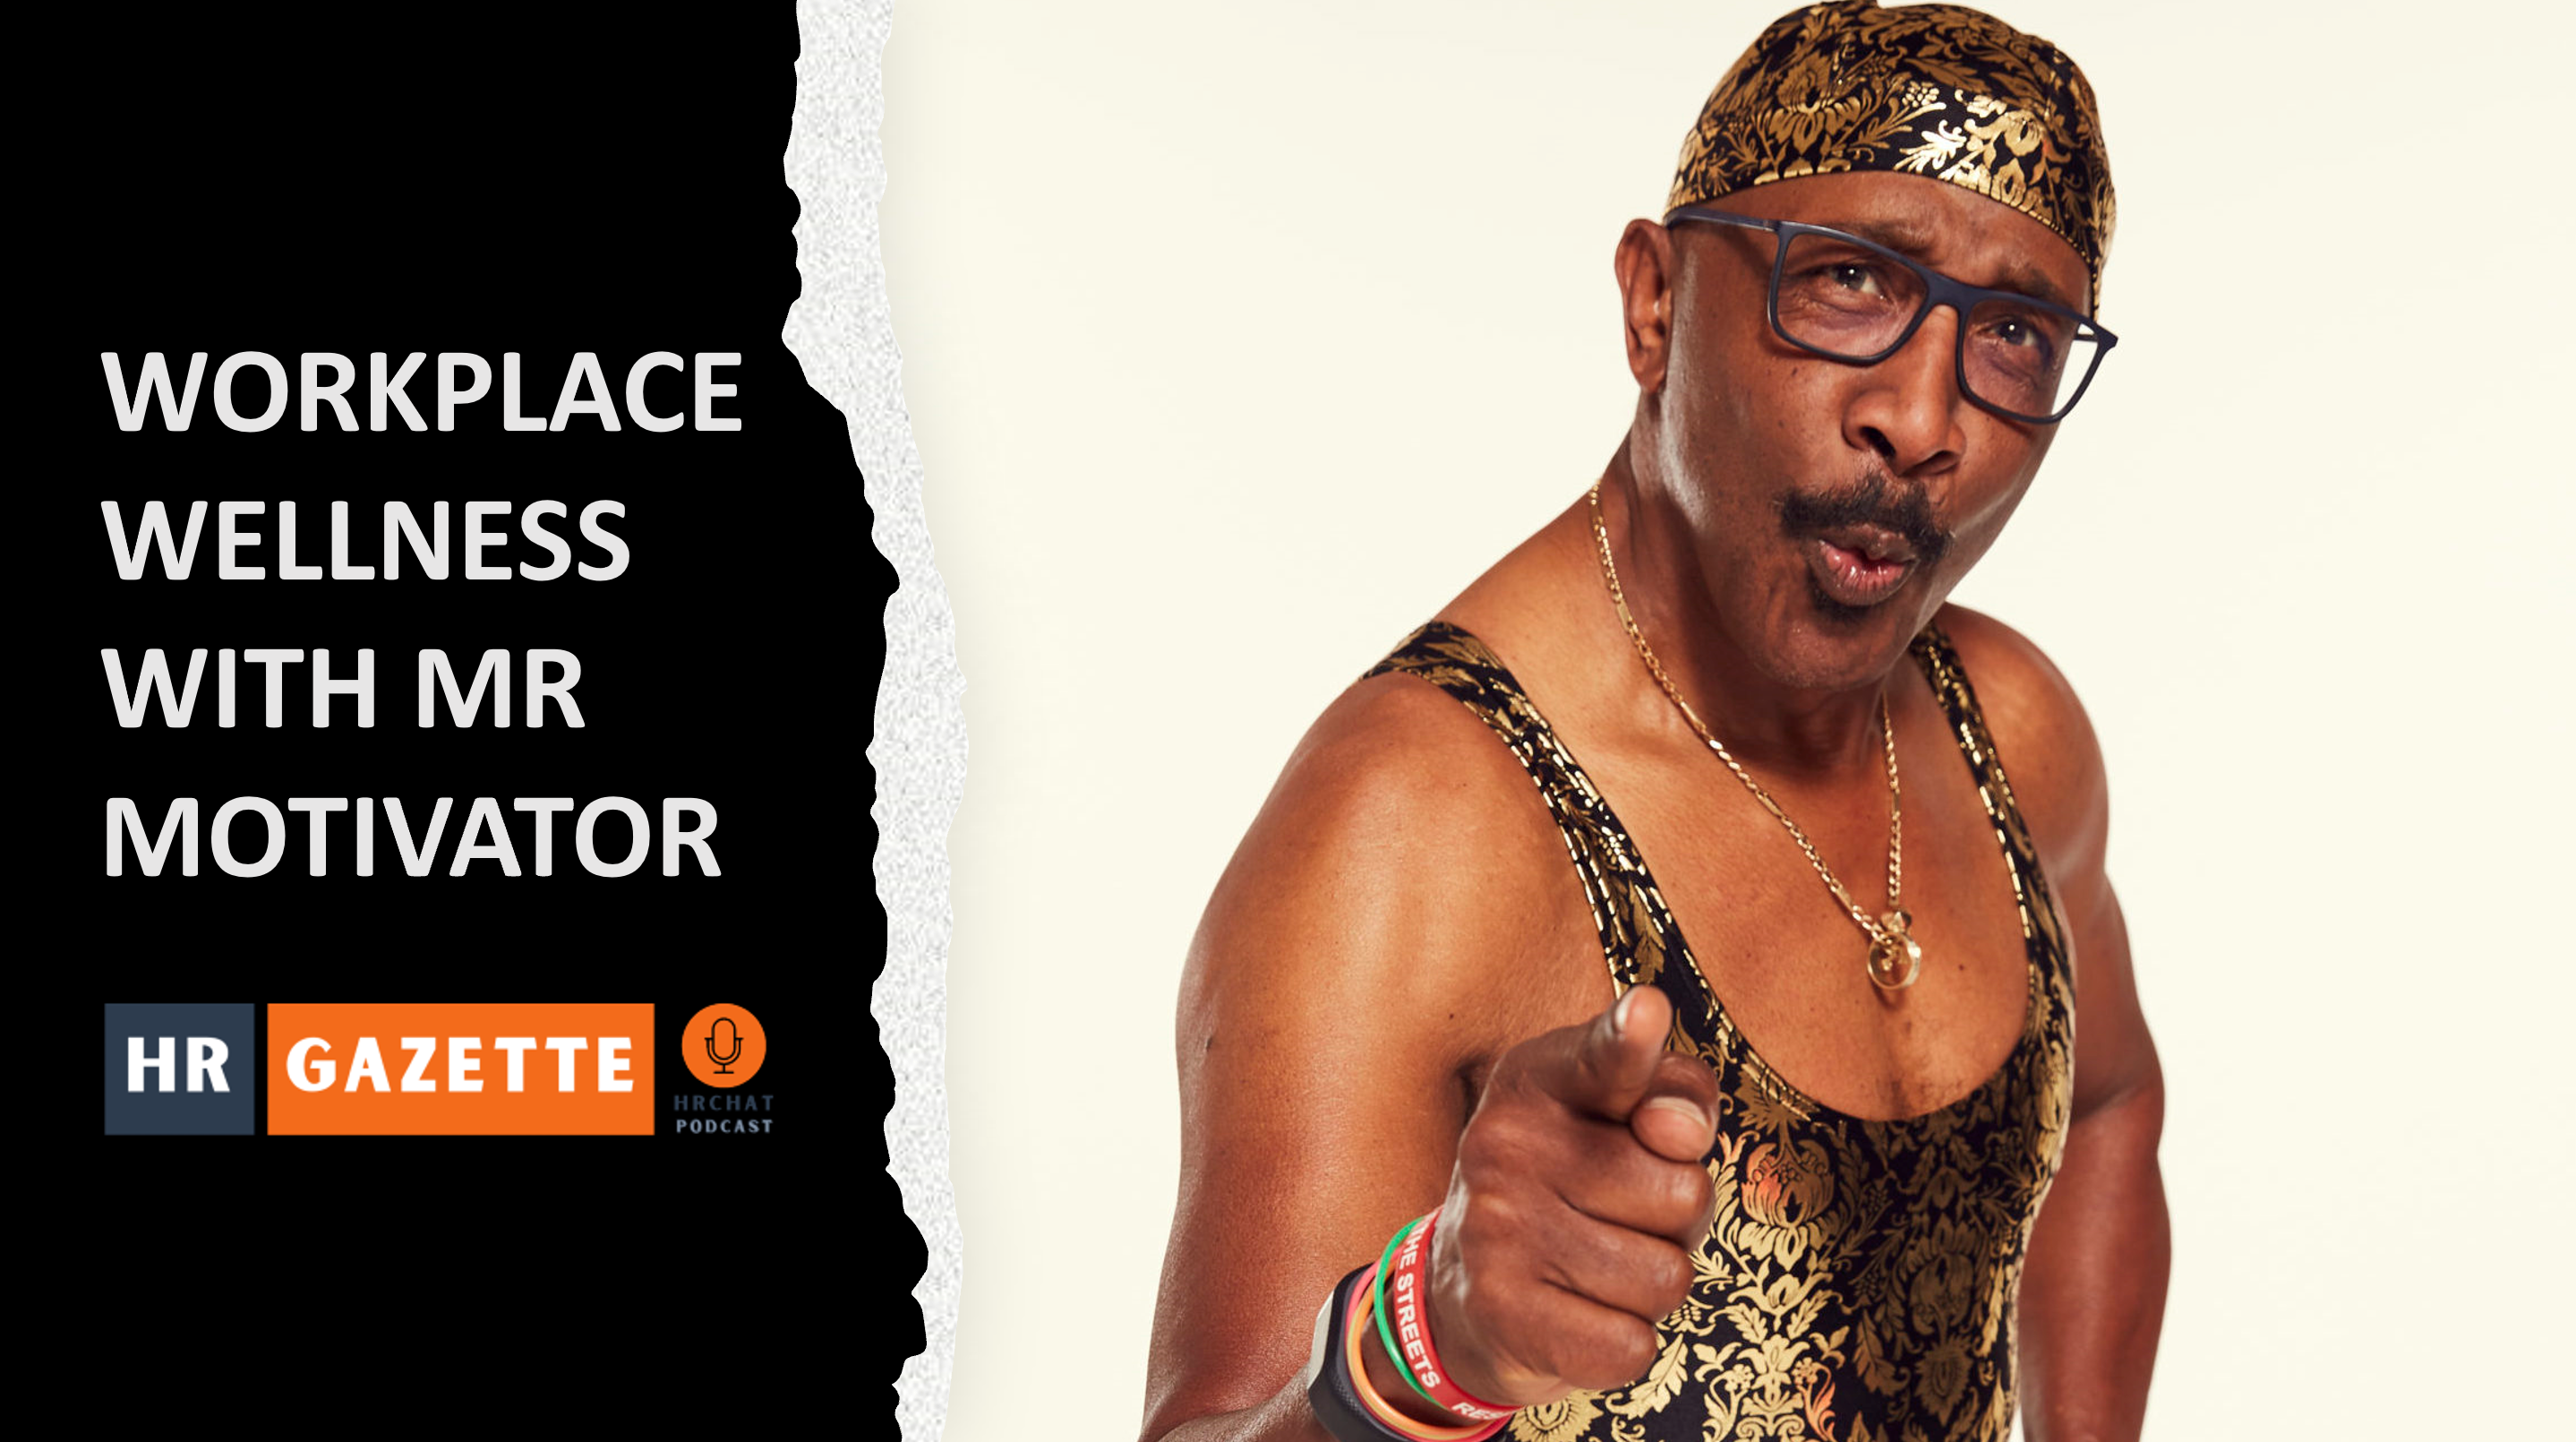 HRchat with Mr Motivator